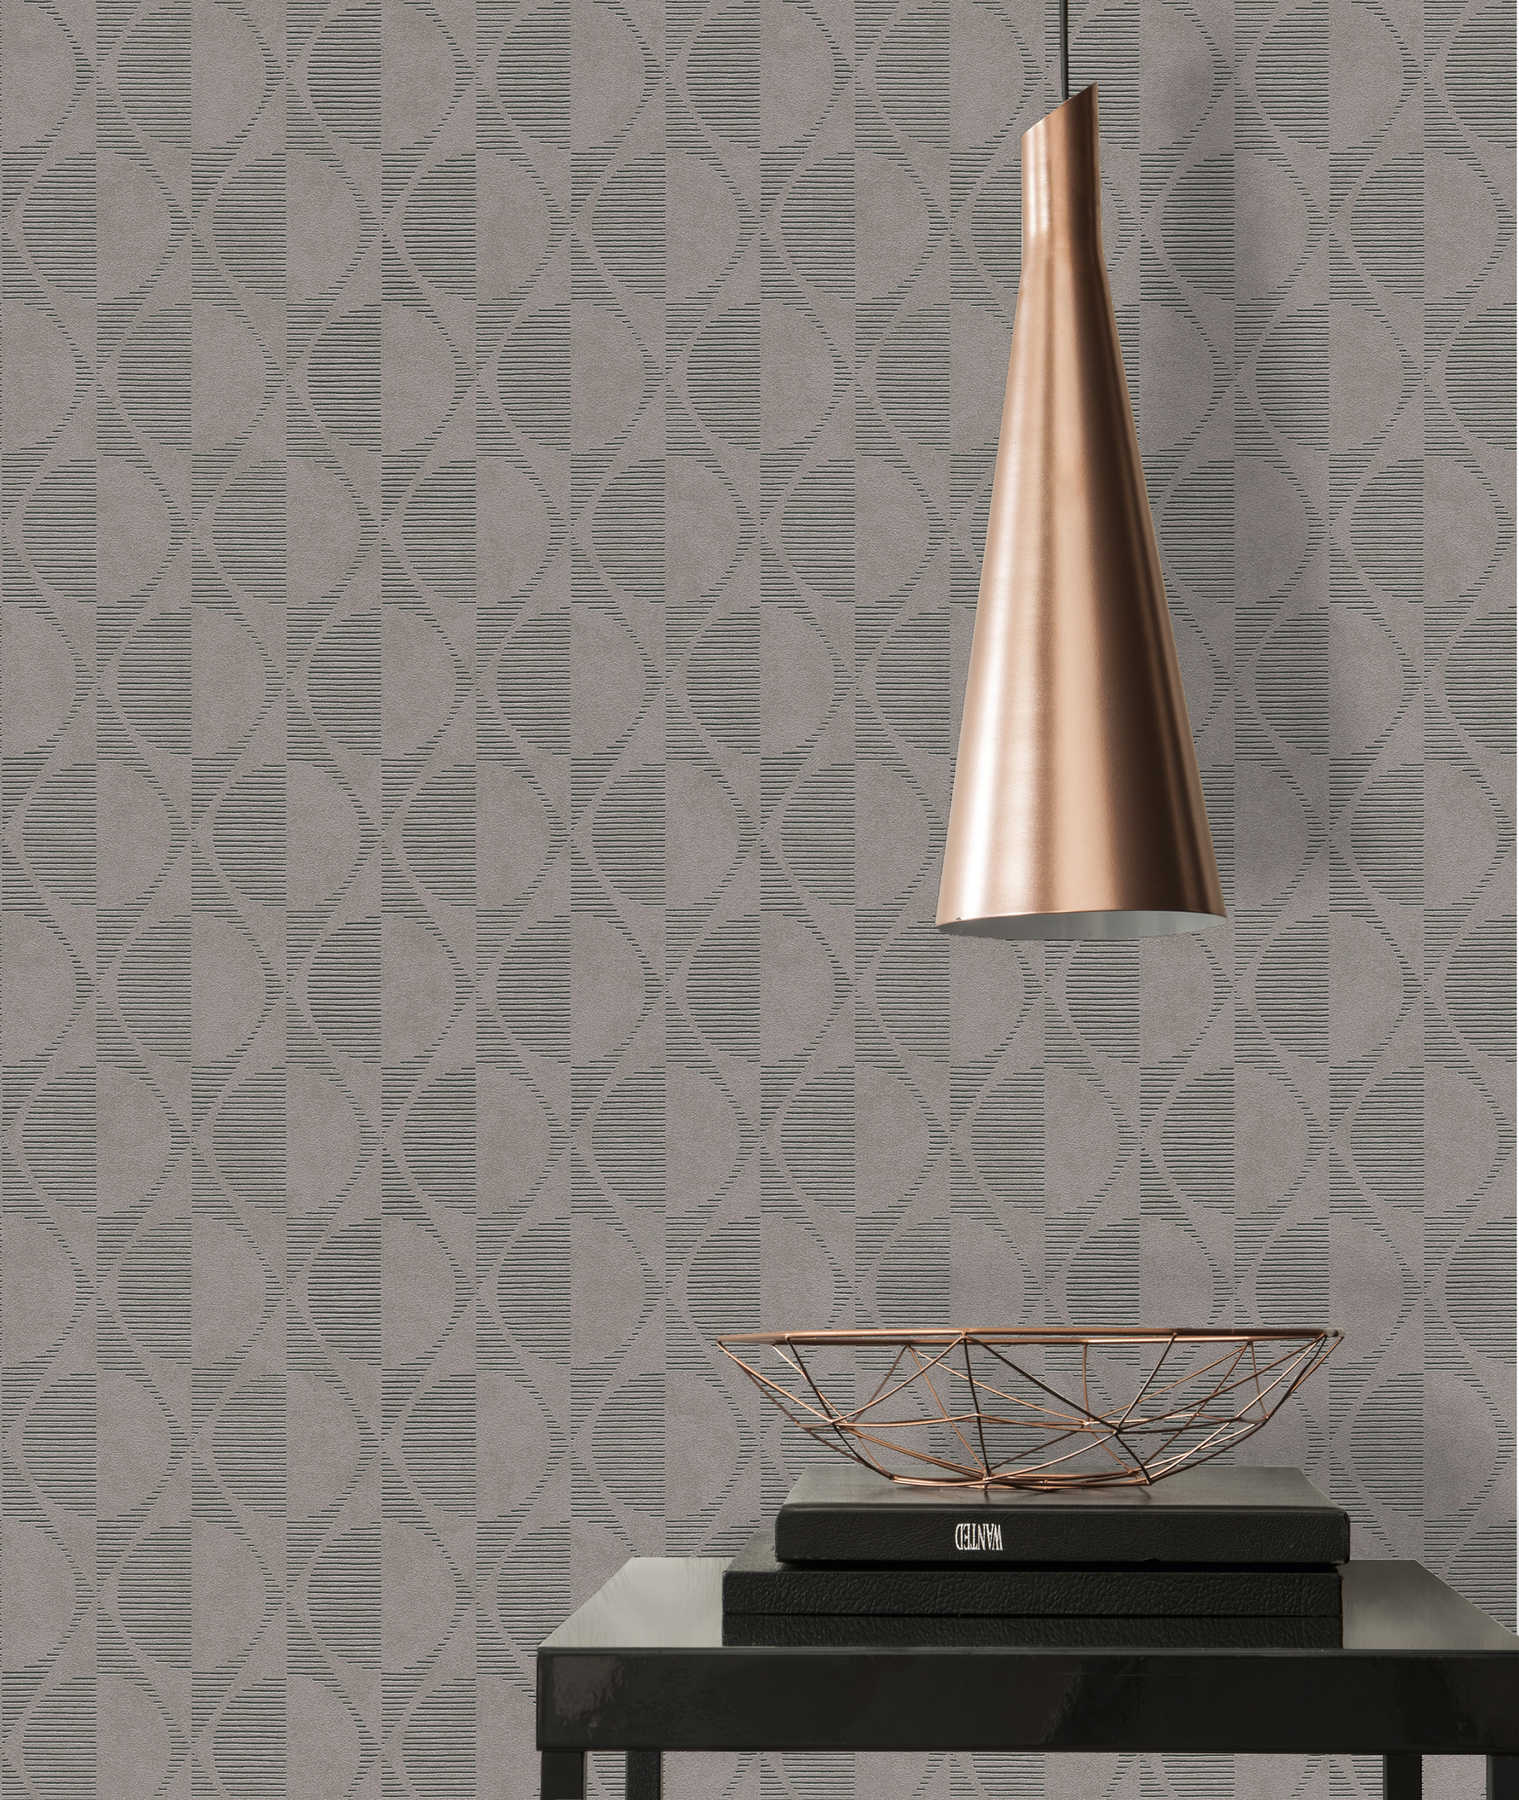             Retro wallpaper with circle and diamond pattern - grey, beige, black
        